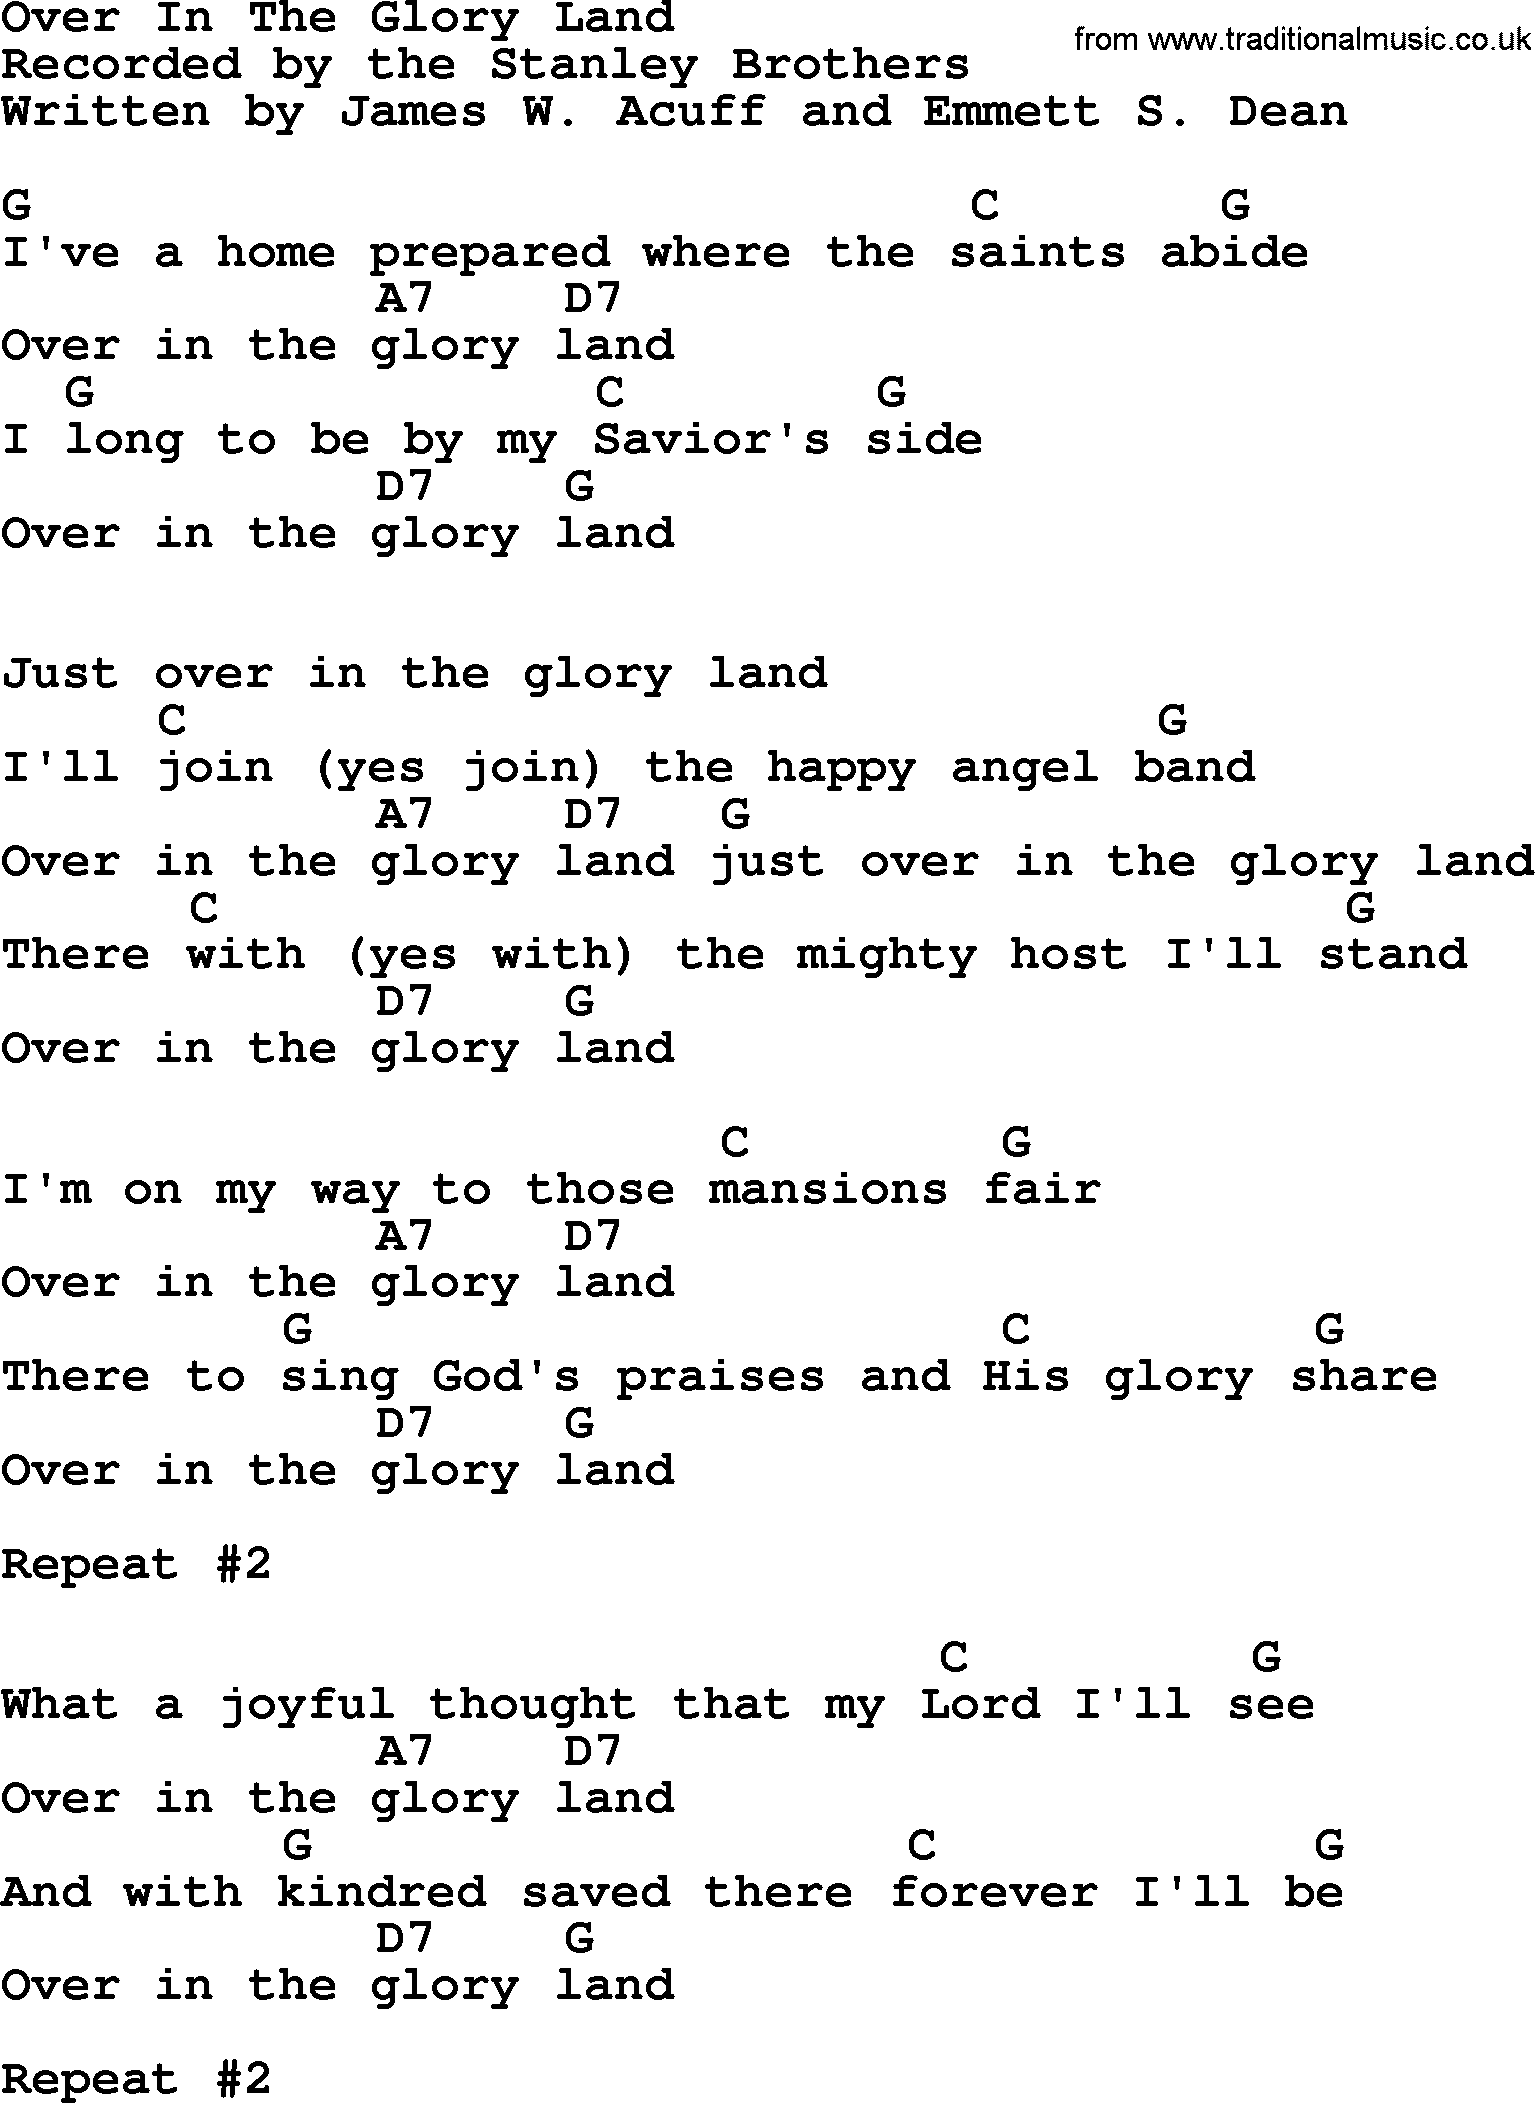 Bluegrass song: Over In The Glory Land, lyrics and chords